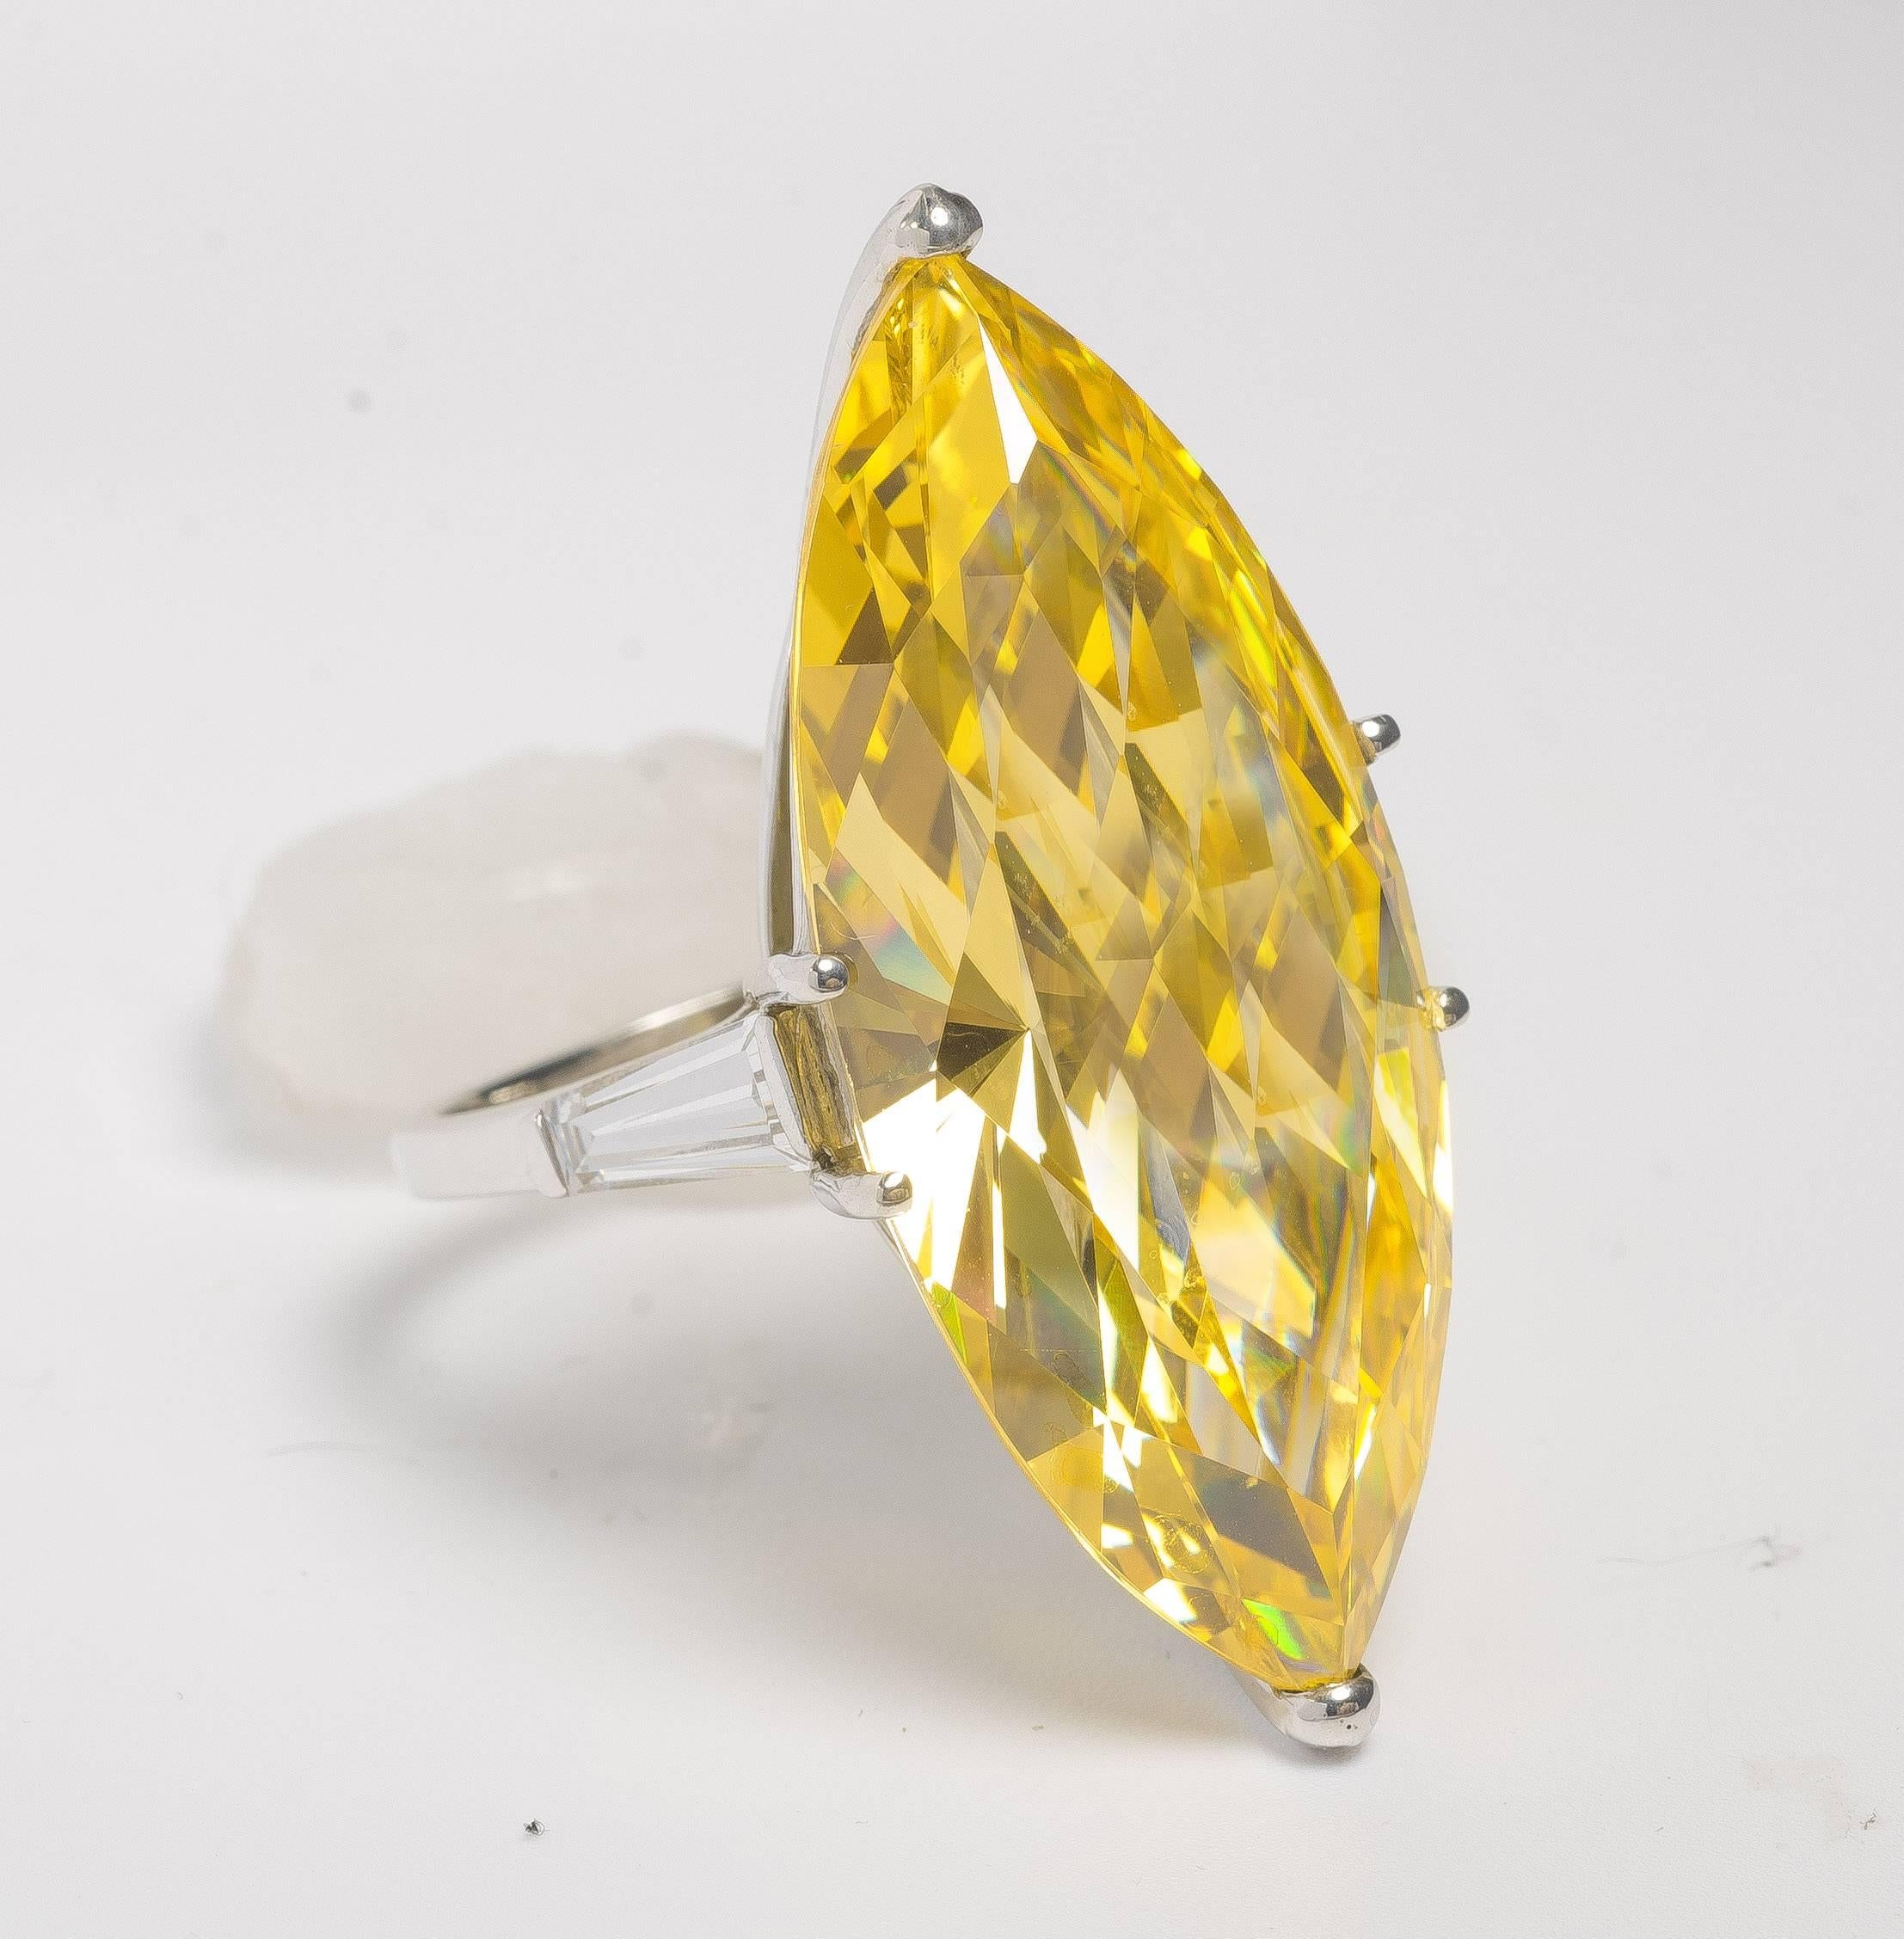 A Fabulous Fake. One for sale here, the other sold at Sotheby's by Daniele Steele that had been bought at Bergdorfs in the 1990s. A copy of the Real One made in canary yellow cubic zircon cut by a NYC diamond cutter. Sides set with tapered CZ